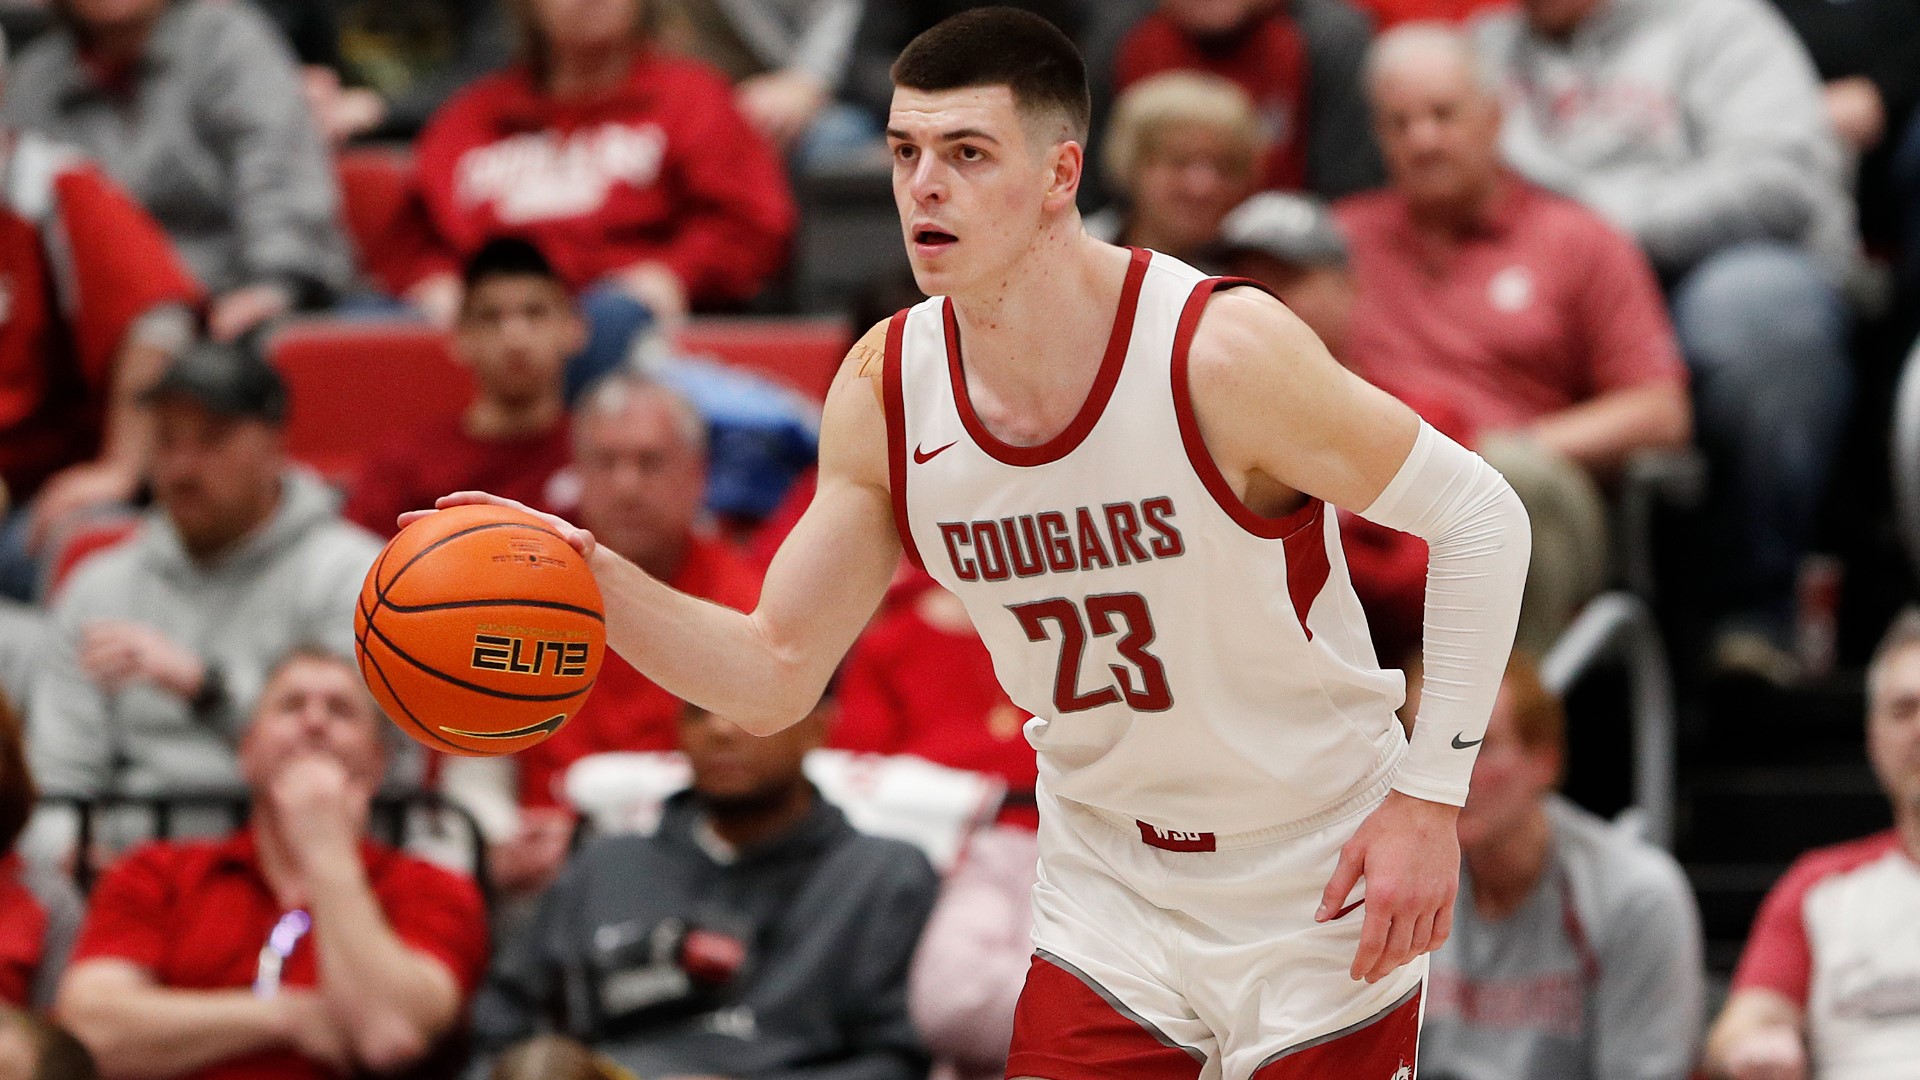 Jakimovski is ready to represent both North Macedonia and Pullman in March Madness.